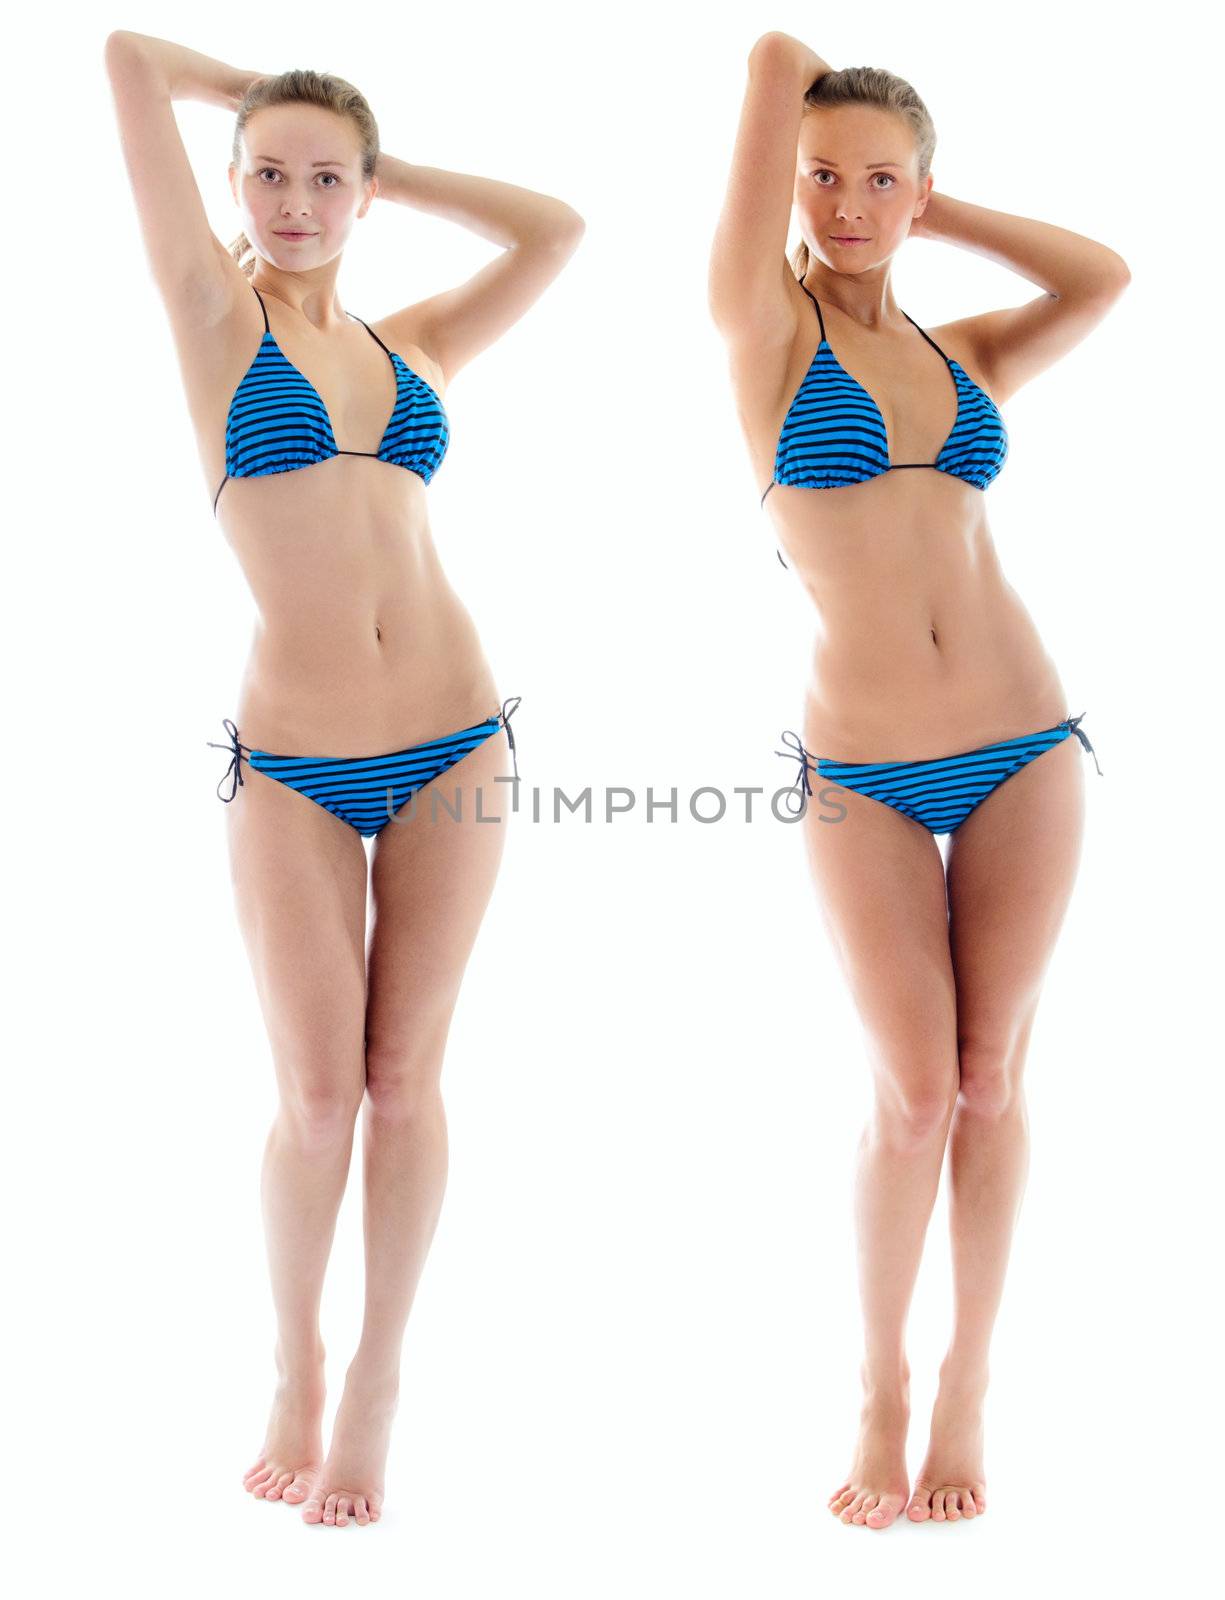 Studio shot of the young adult woman isolated over white background. Two shots show her skin tone before and after solarium and identical tanning procedures.